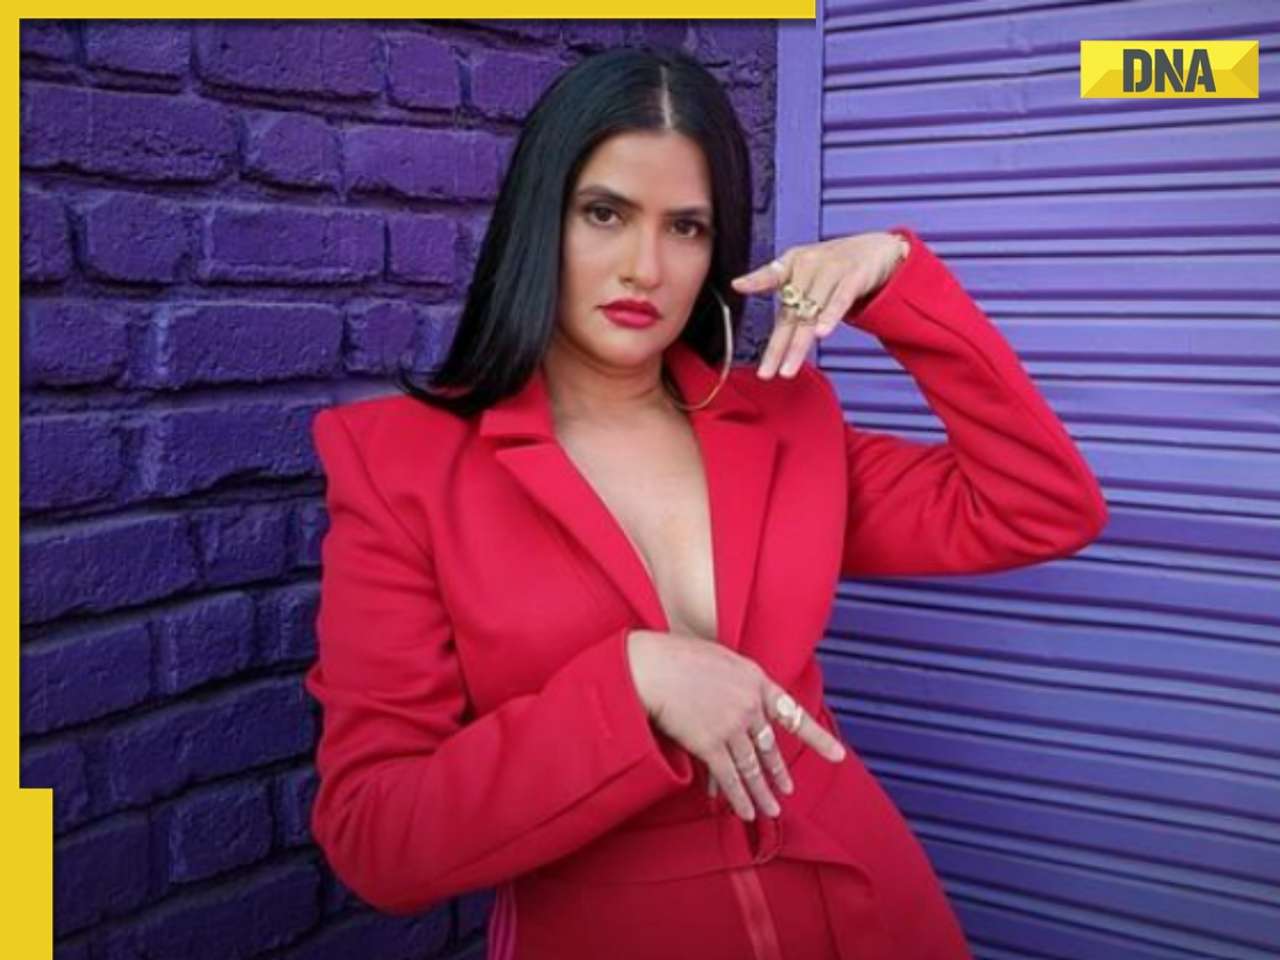 Sona Mohapatra slams trolls targeting her in pics where she's 'not all covered up': 'I used to get triggered...'